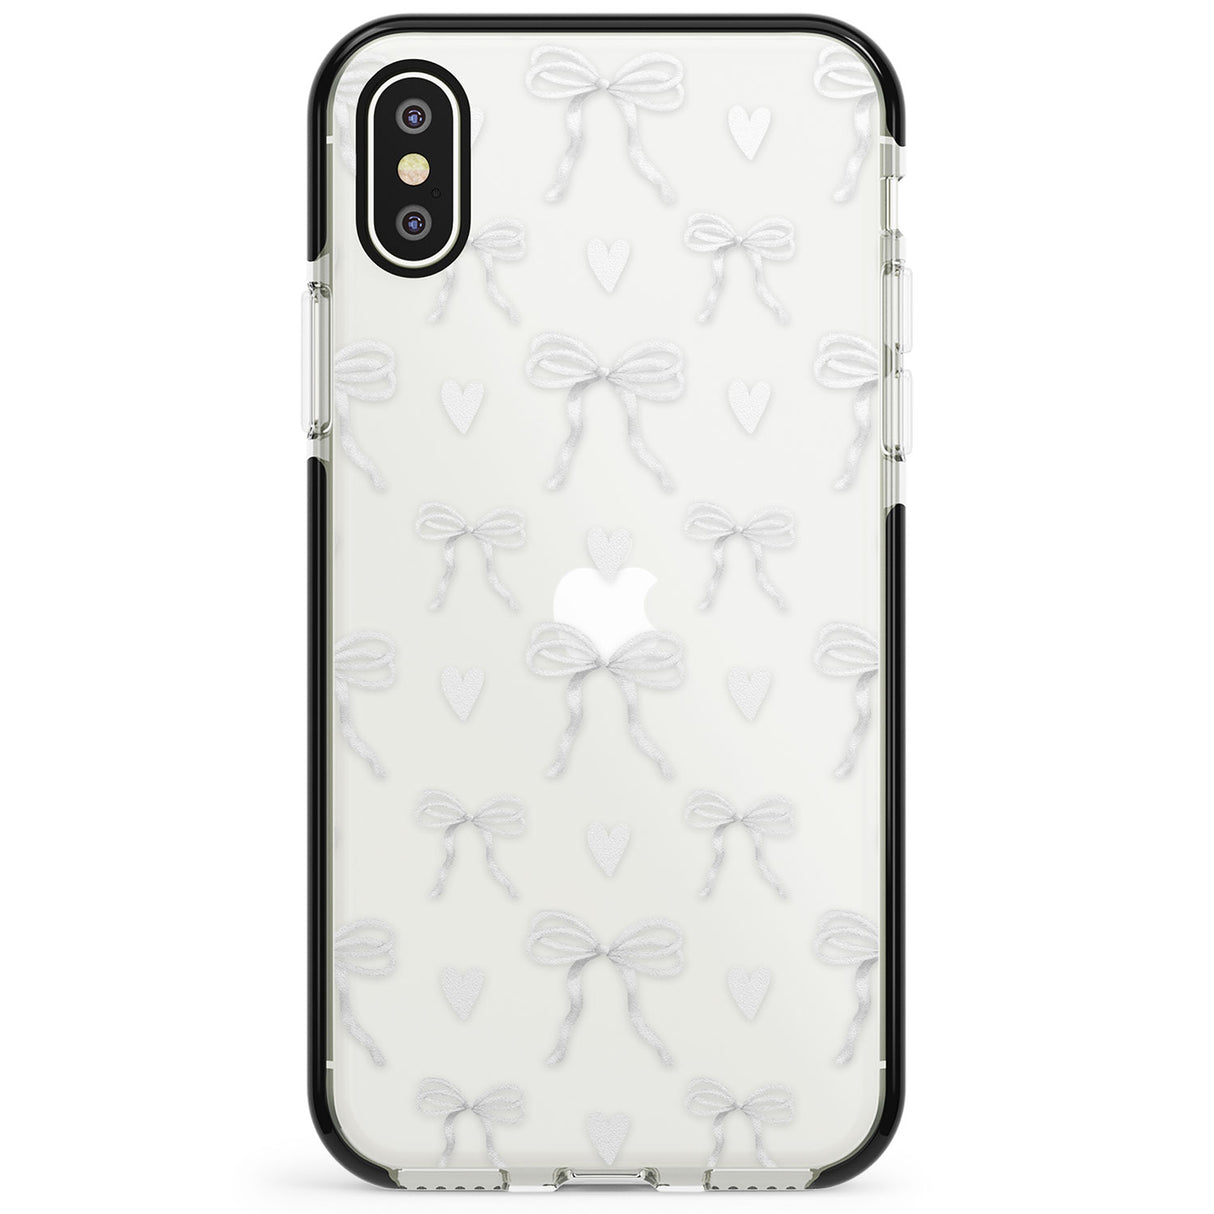 White Bows & Hearts Phone Case for iPhone X XS Max XR